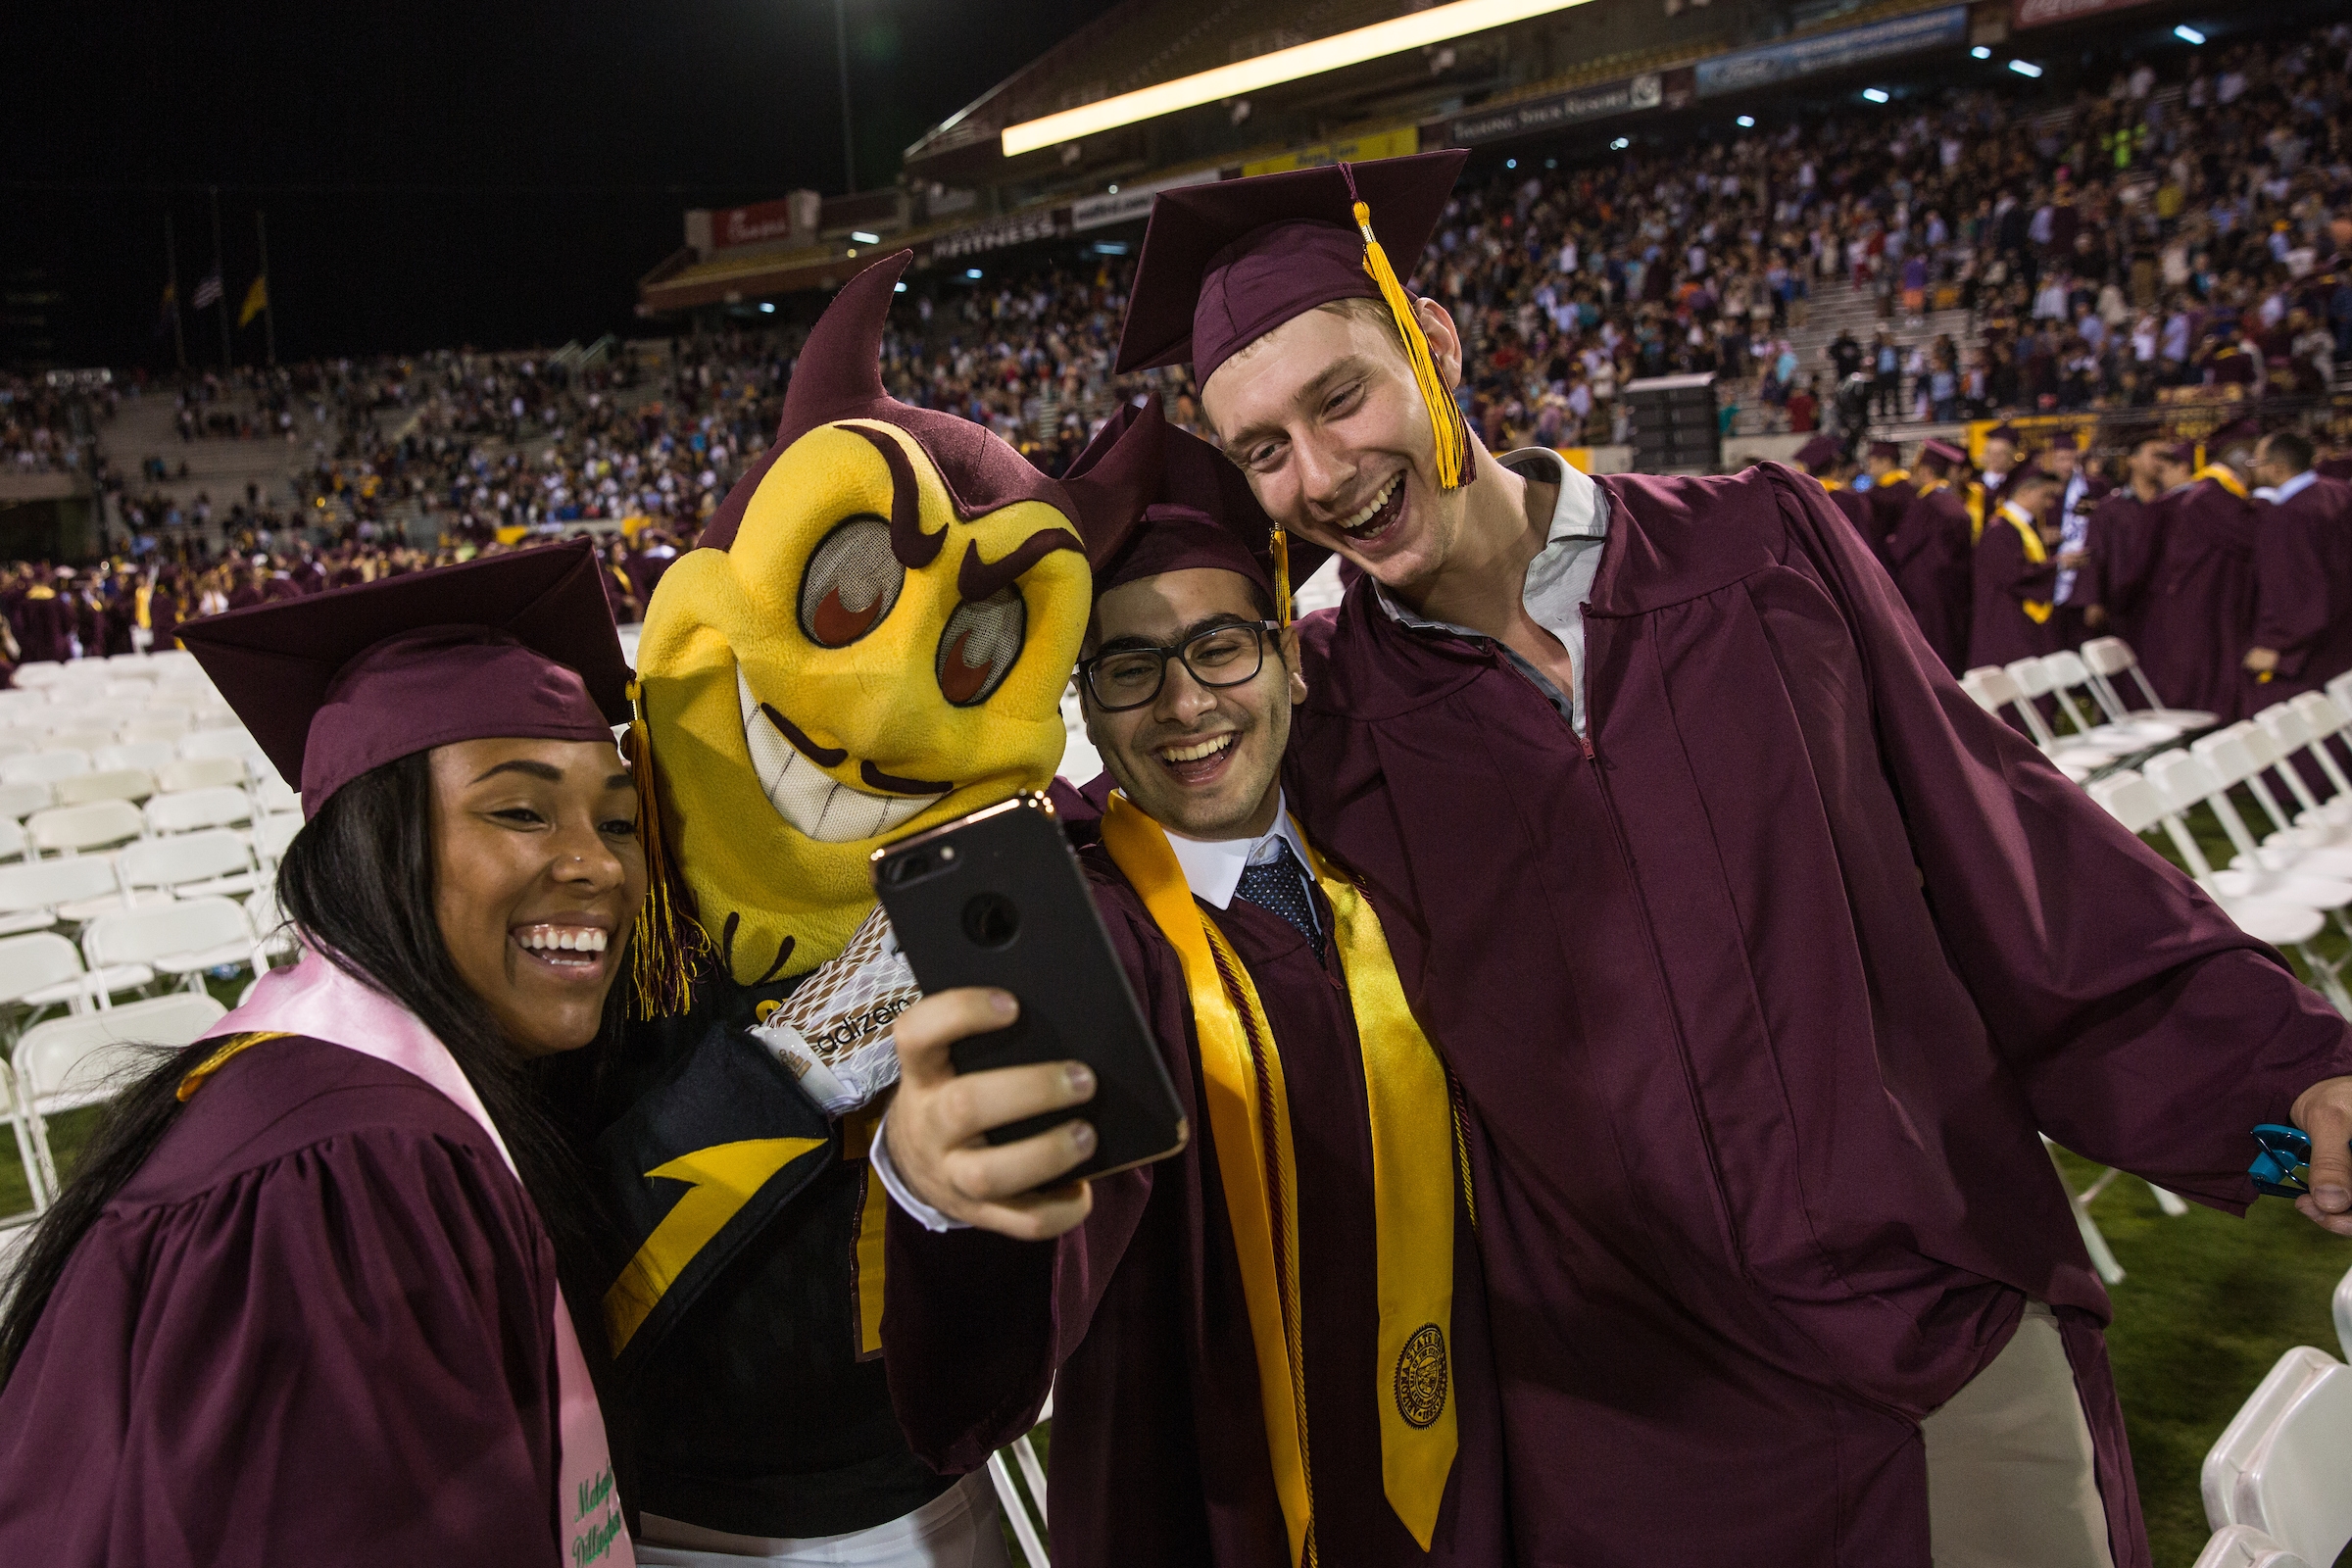 New ASU graduates pose with Sparky at commencement